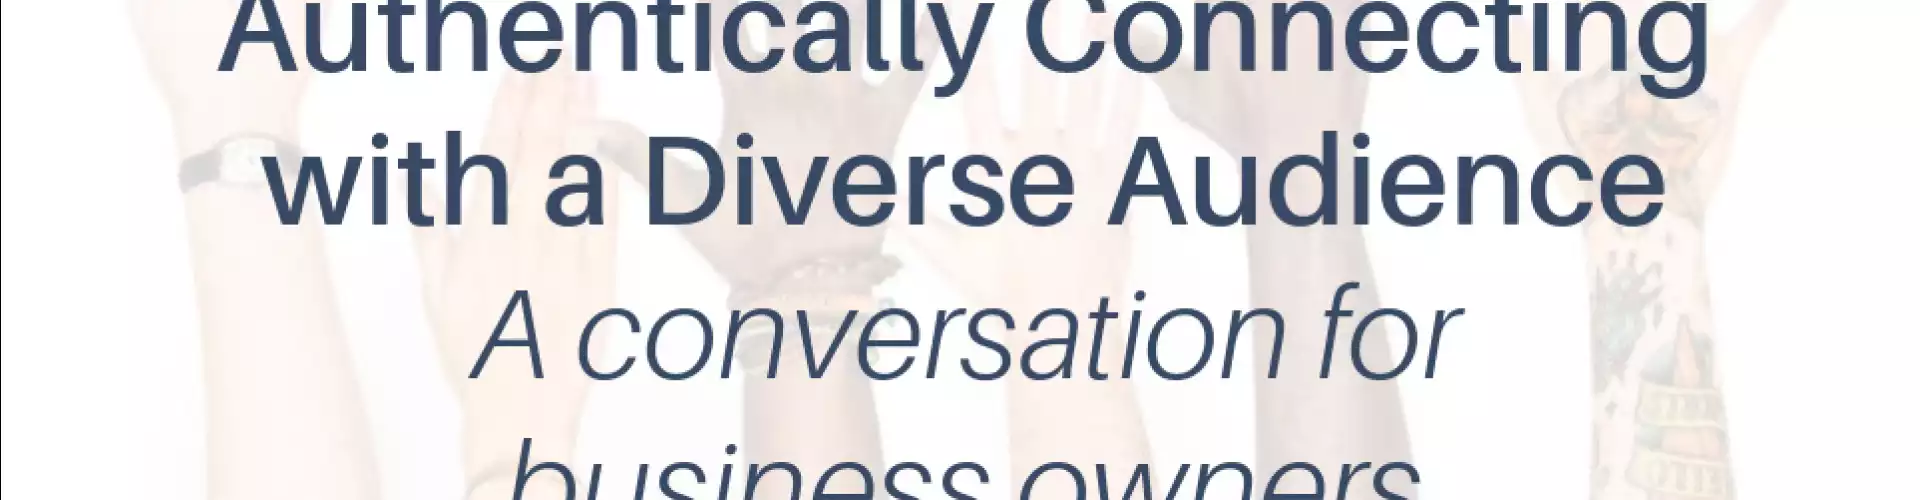 Authentically Connecting with a Diverse Audience